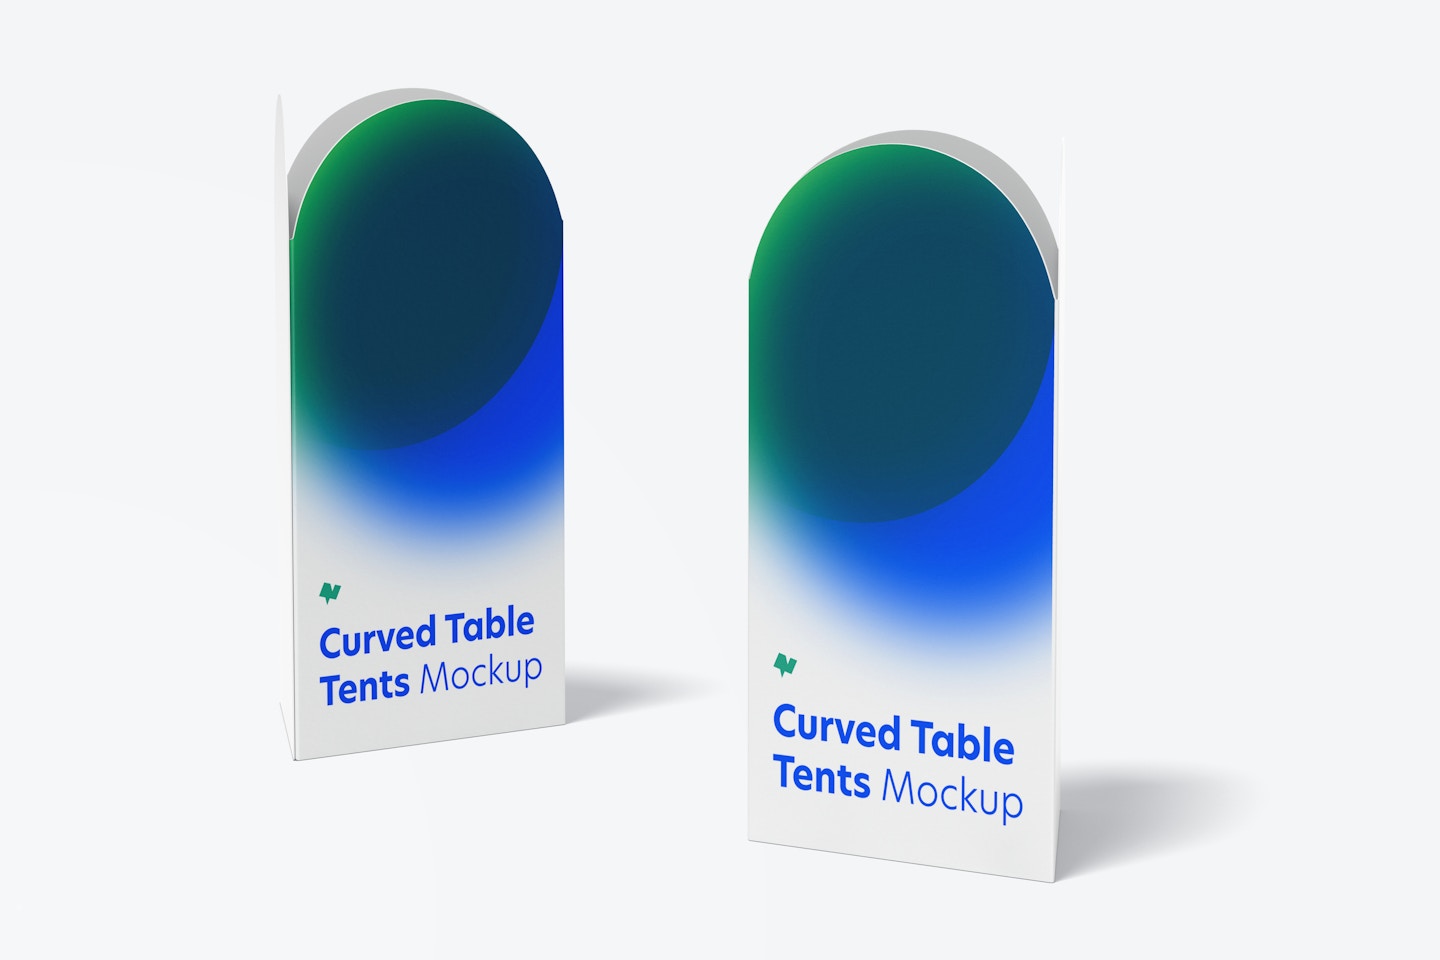 Curved Top Table Tents Mockup, Perspective